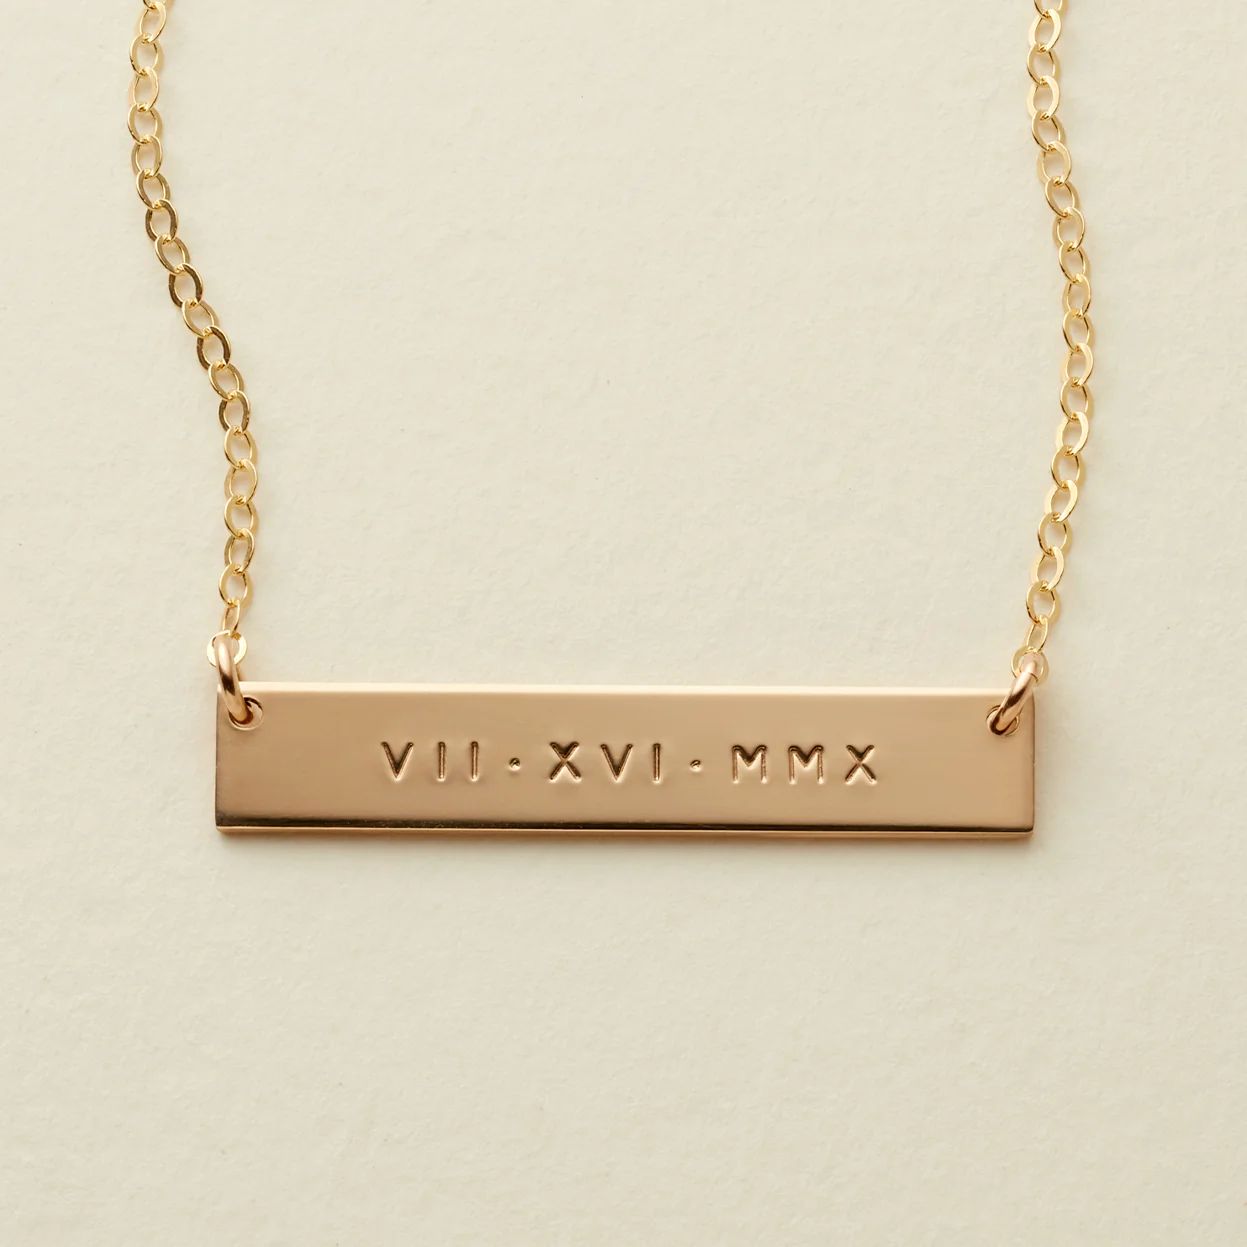 Roman Numerals Bar Necklace | 1.50 | Made by Mary (US)